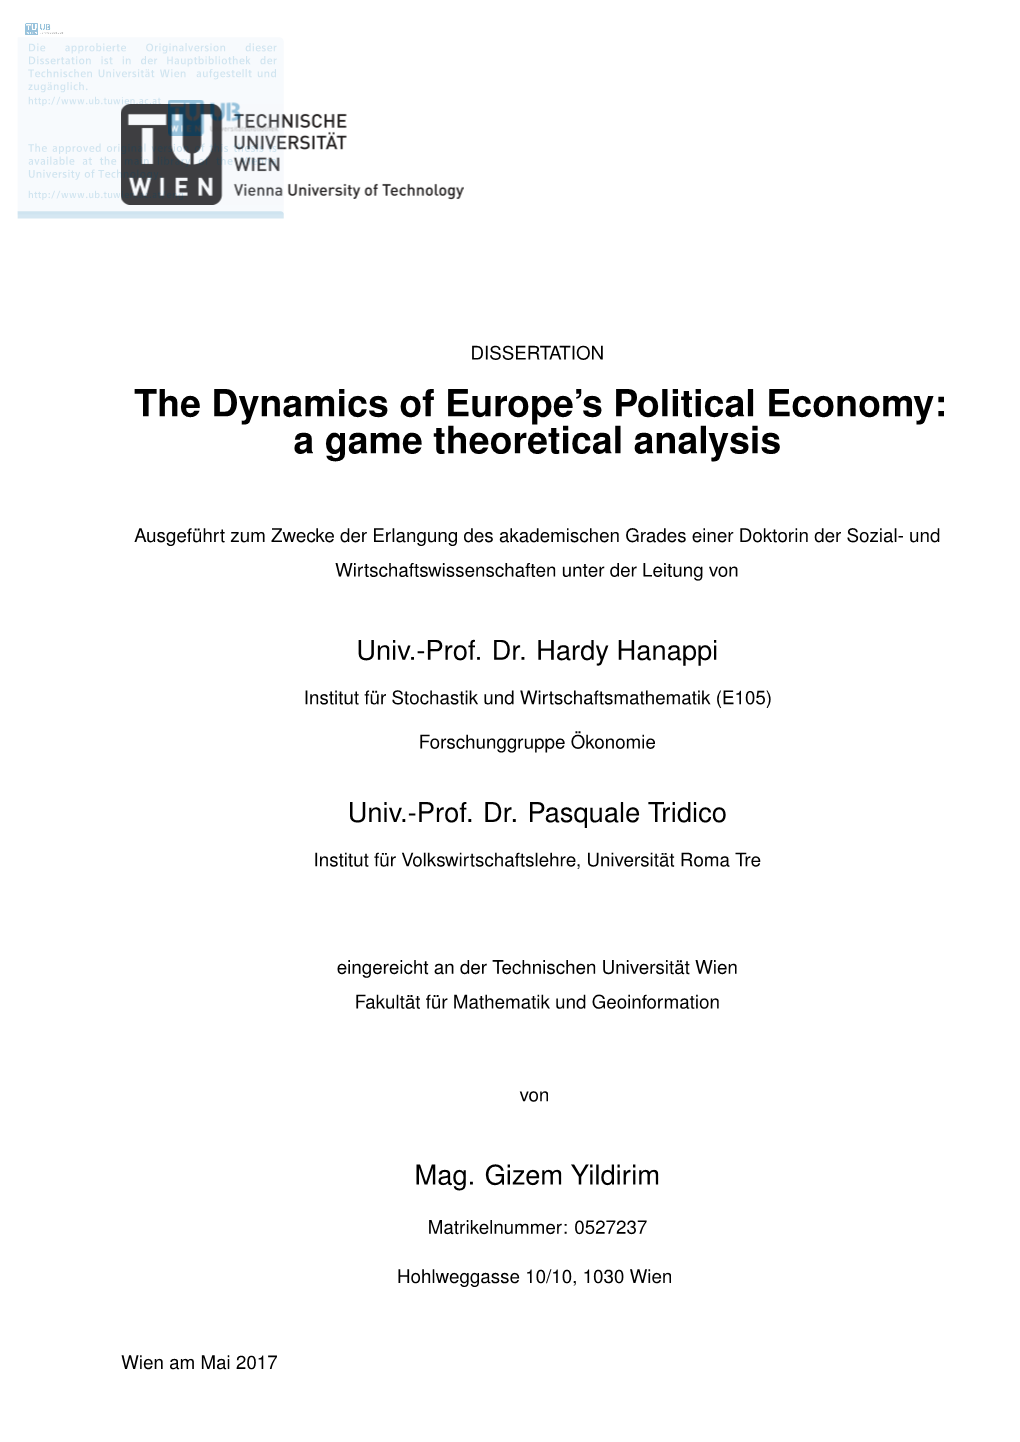 The Dynamics of Europe's Political Economy